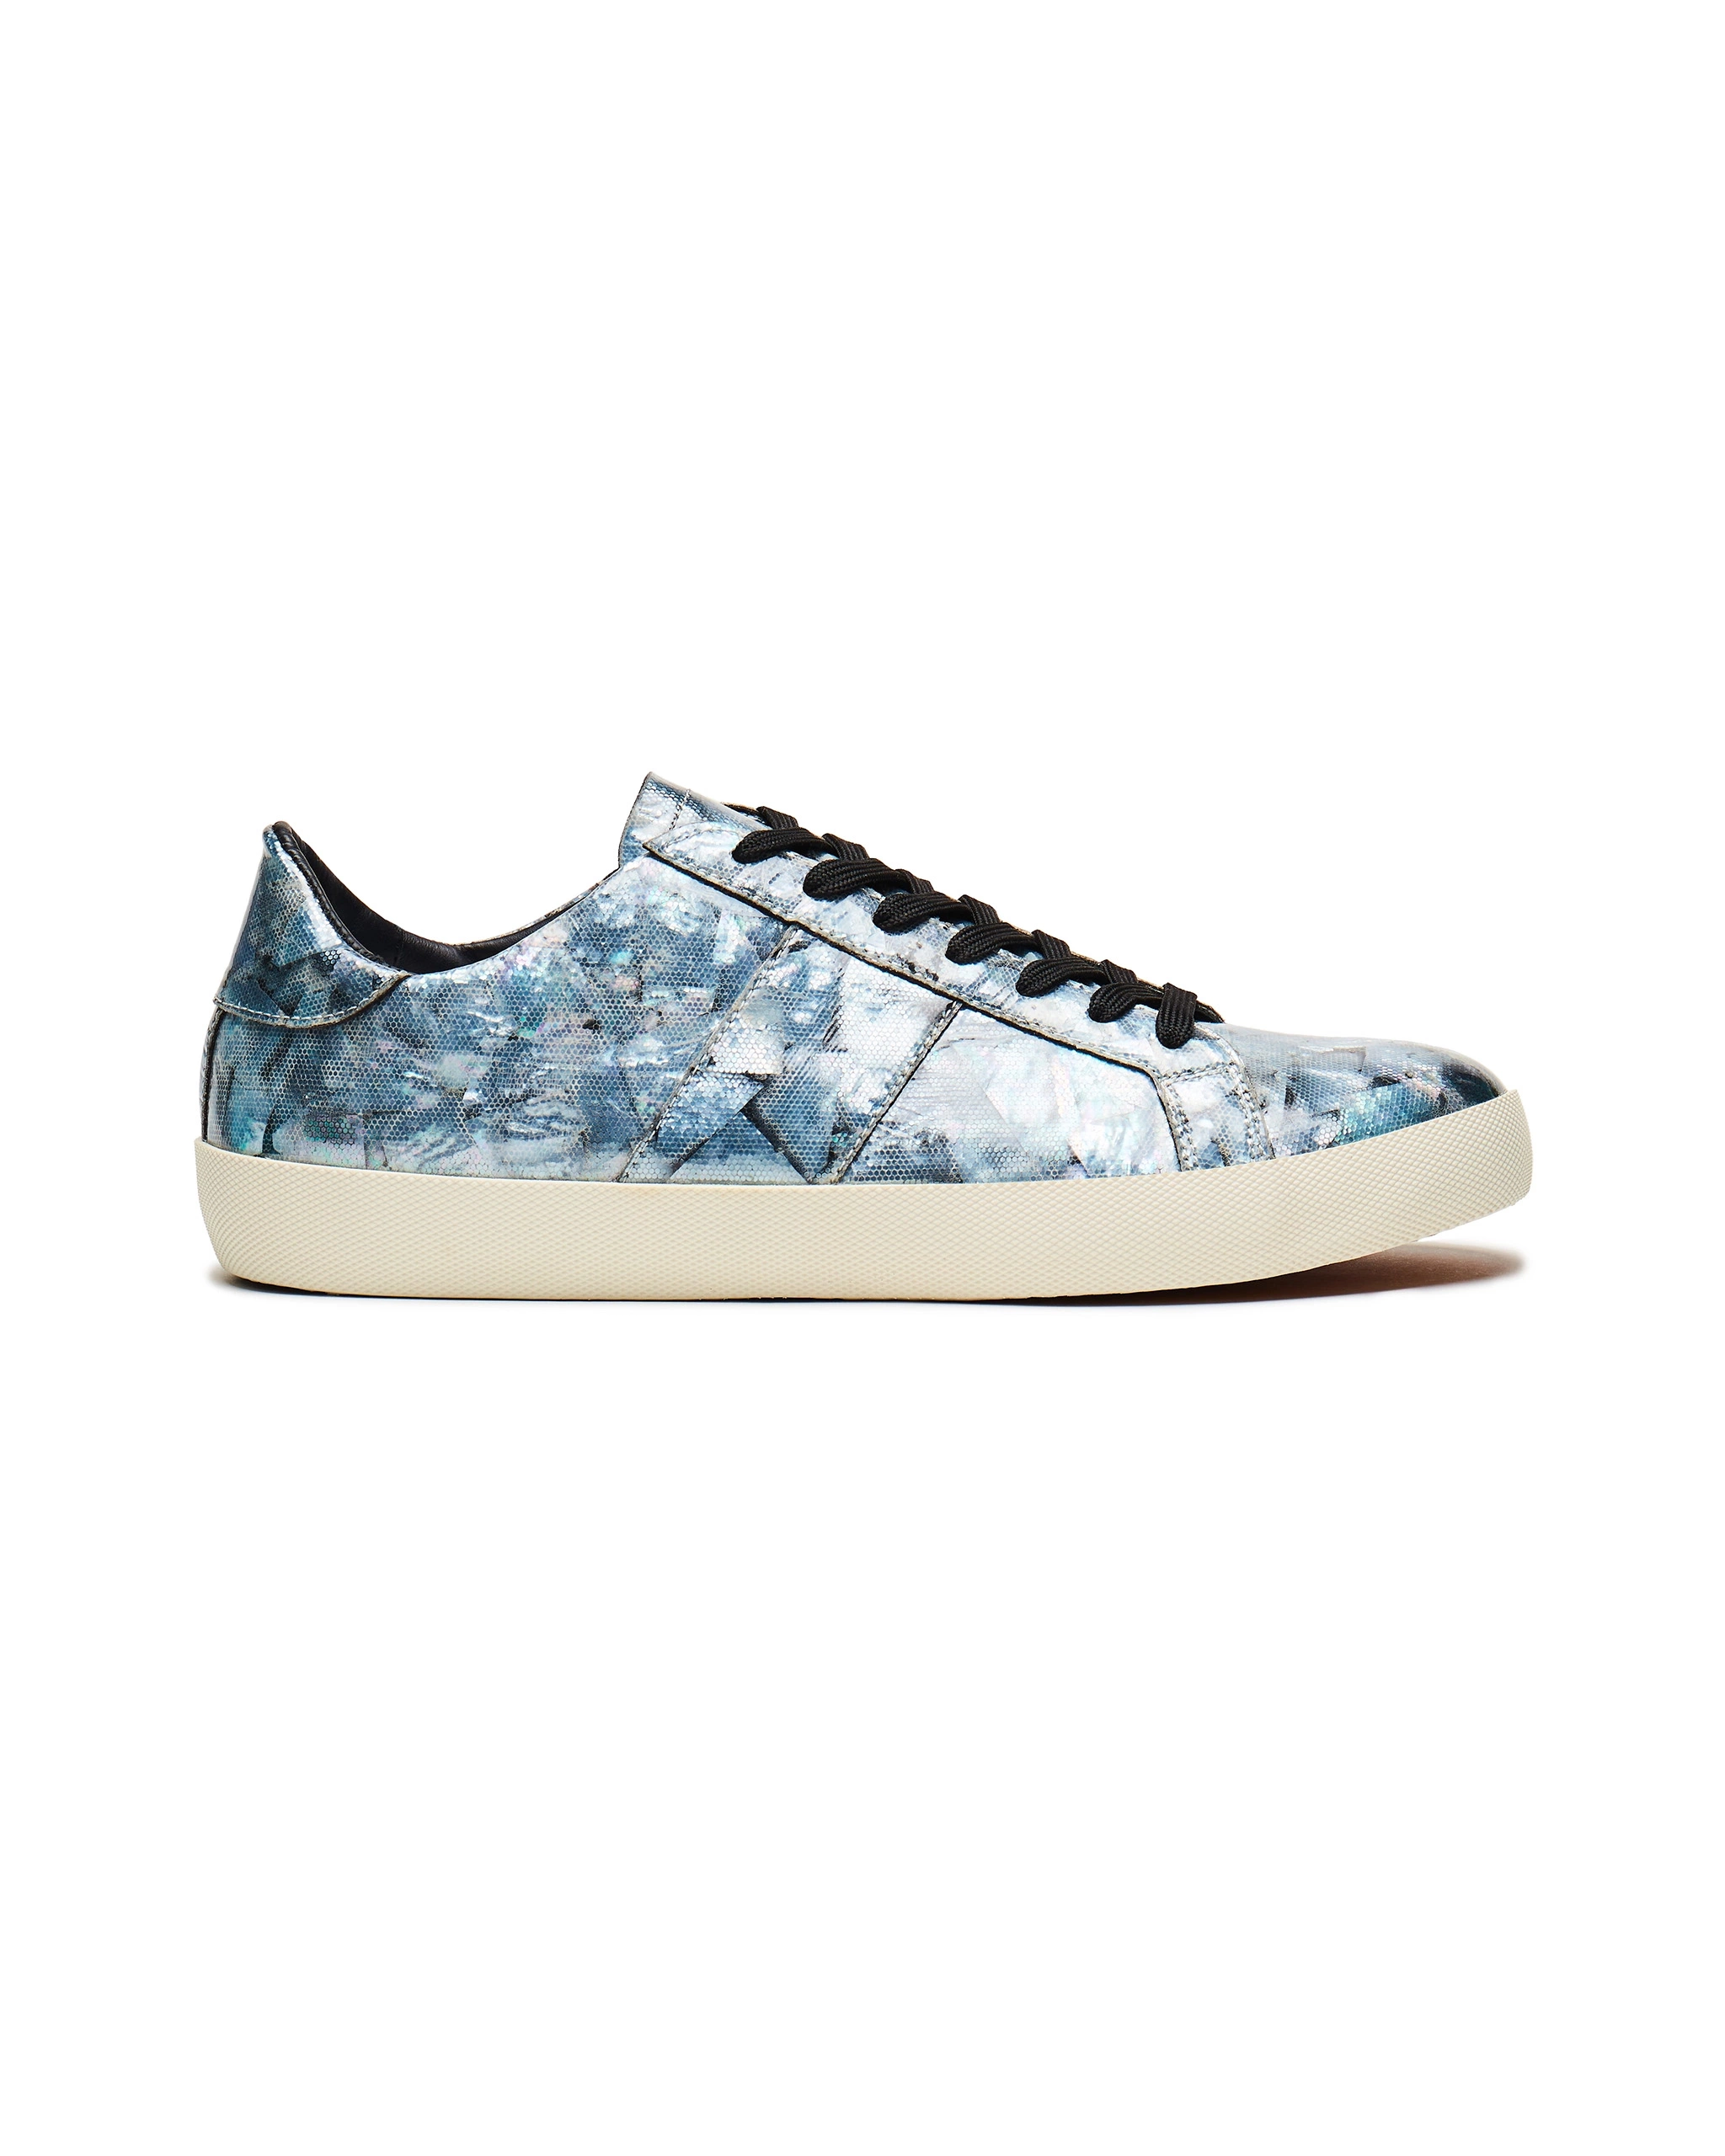 a blue and white mother of pearl shoe